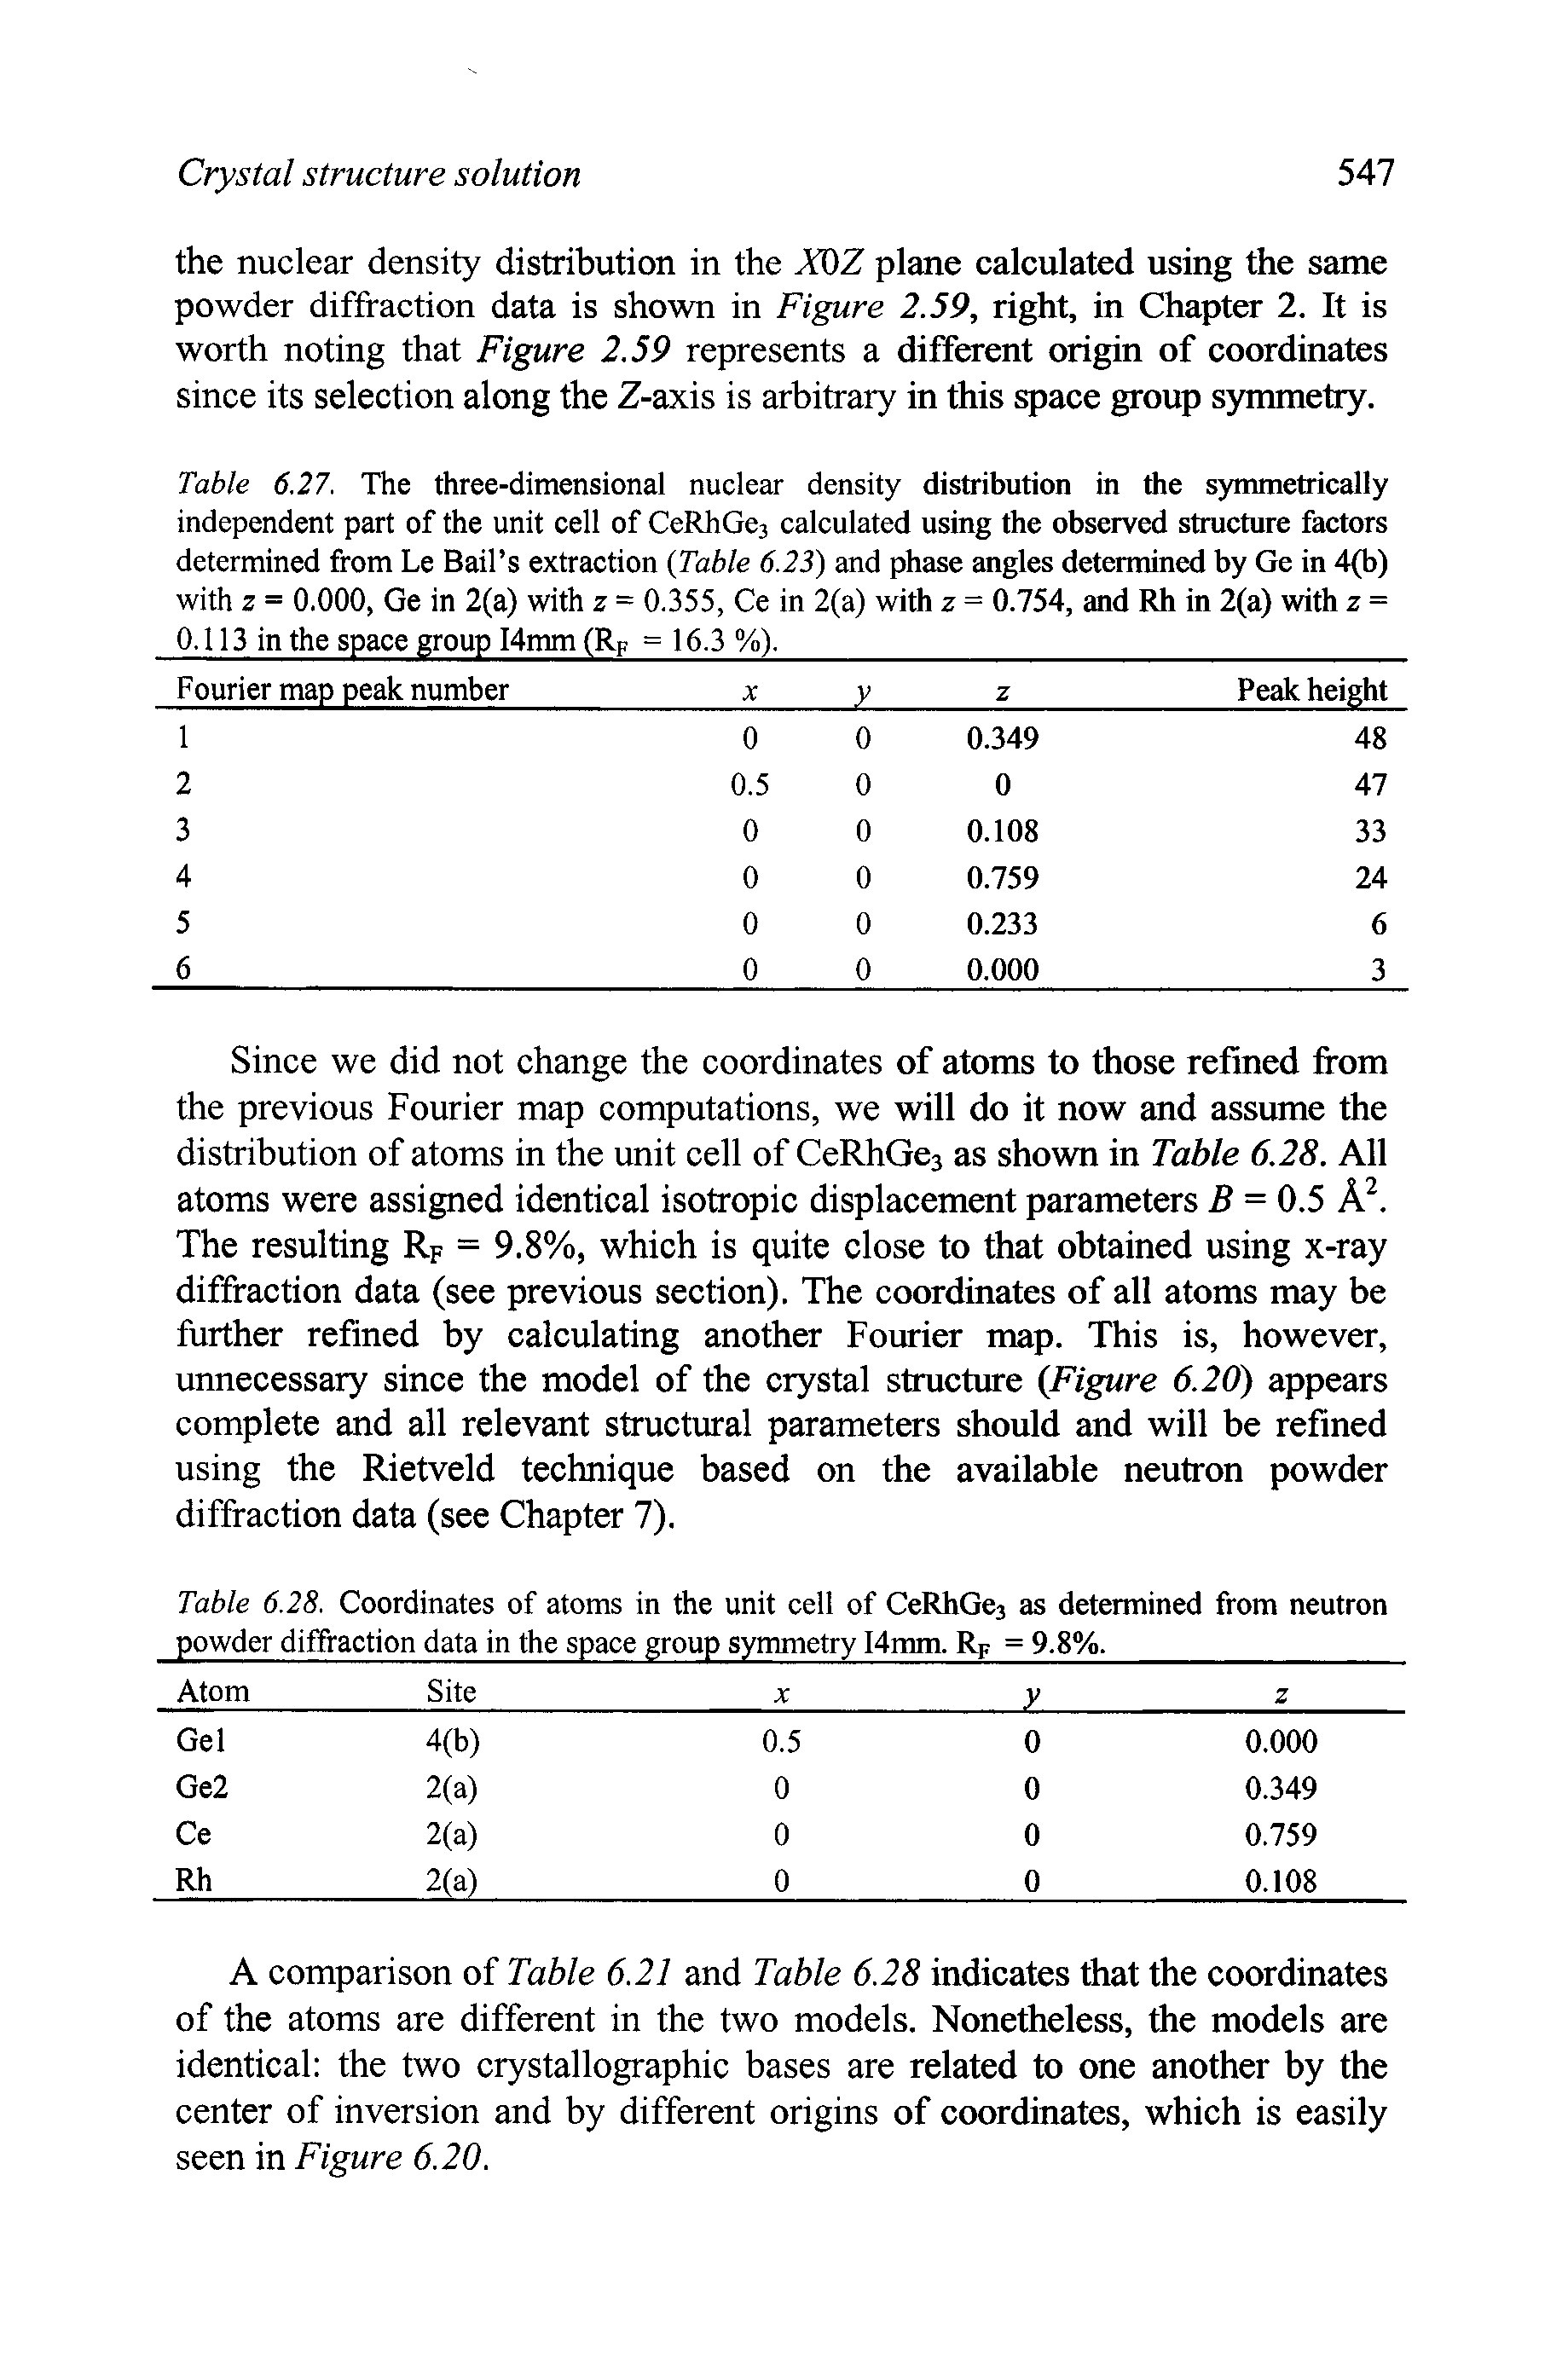 Table 6.27. The three-dimensional nuclear density distribution in the symmetrically independent part of the unit cell of CeRhGea calculated using the observed structure factors determined from Le Bail s extraction Table 6.23) and phase angles determined by Ge in 4(b) with z = 0.000, Ge in 2(a) with z = 0.355, Ce in 2(a) with z = 0.754, and Rh in 2(a) with z = 0.113 in the space group I4mm (Rp = 16.3 %). ...